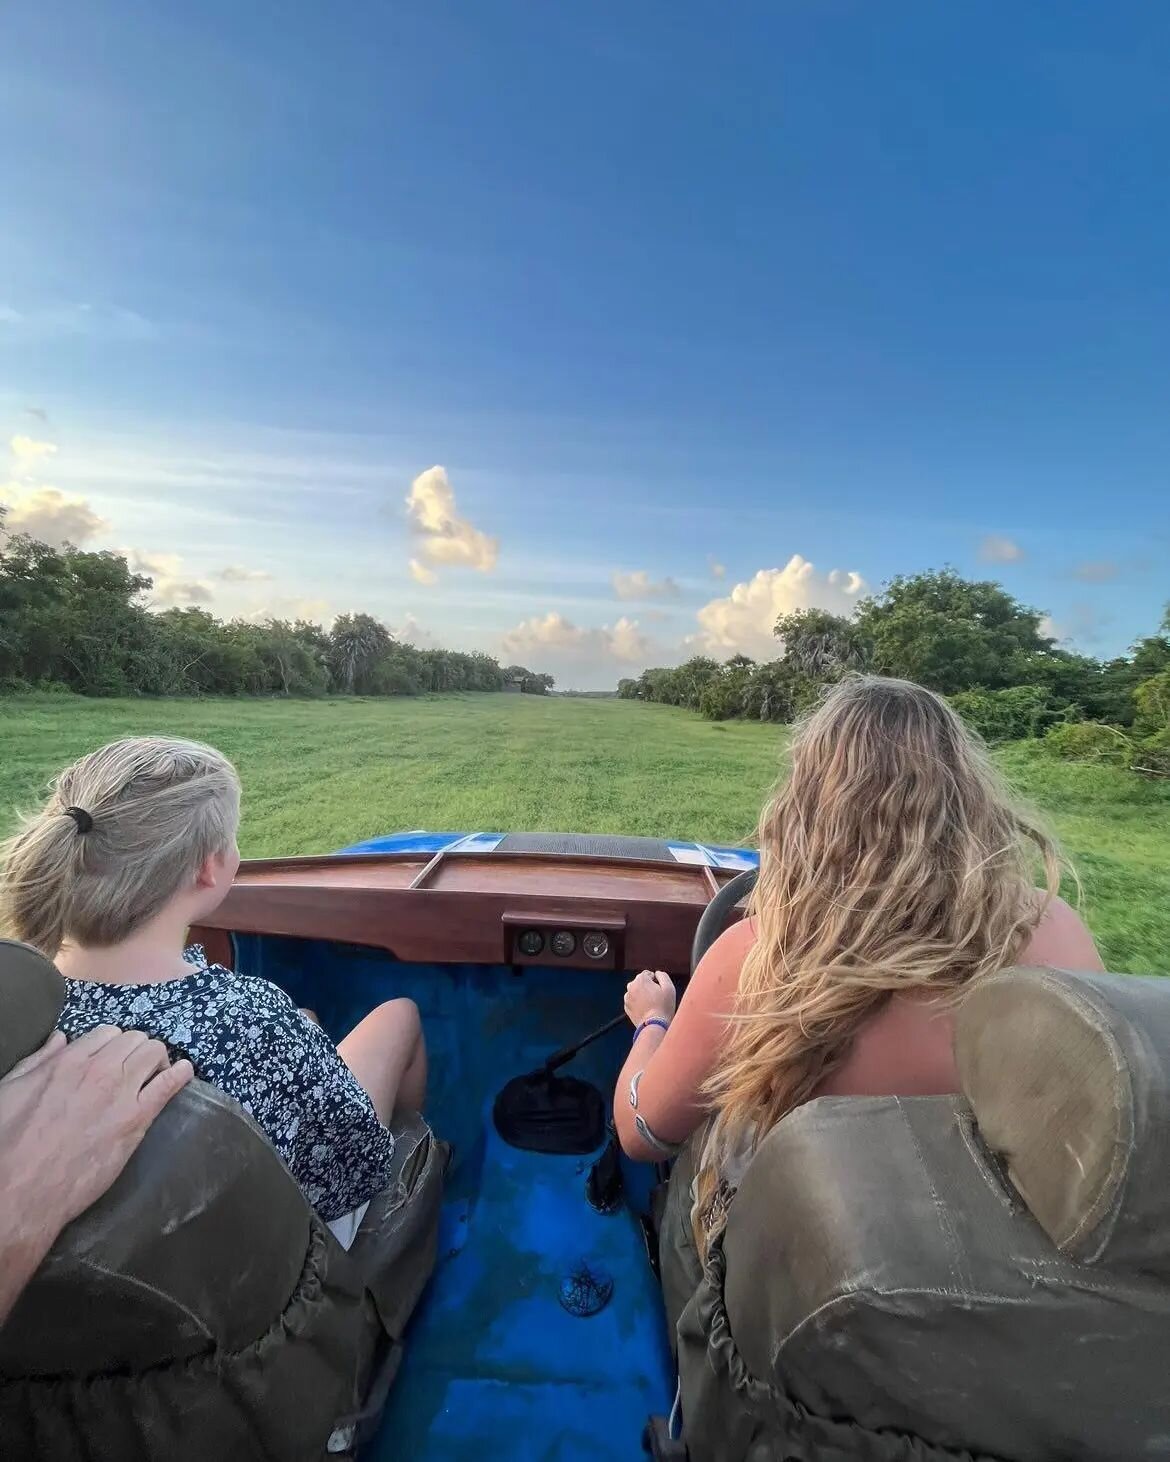 Our guests off for a sundowner cruise ❤️

Thank you @lulapinkloves for staying and sharing your travels with us!

#Airstrip #Landrover #Adventure #Escape #Sunset #Sundowner#Explore #MandaBay #Lamu #SccKenya #Iamatraveler #Tembeaakenya #MagicalKenya